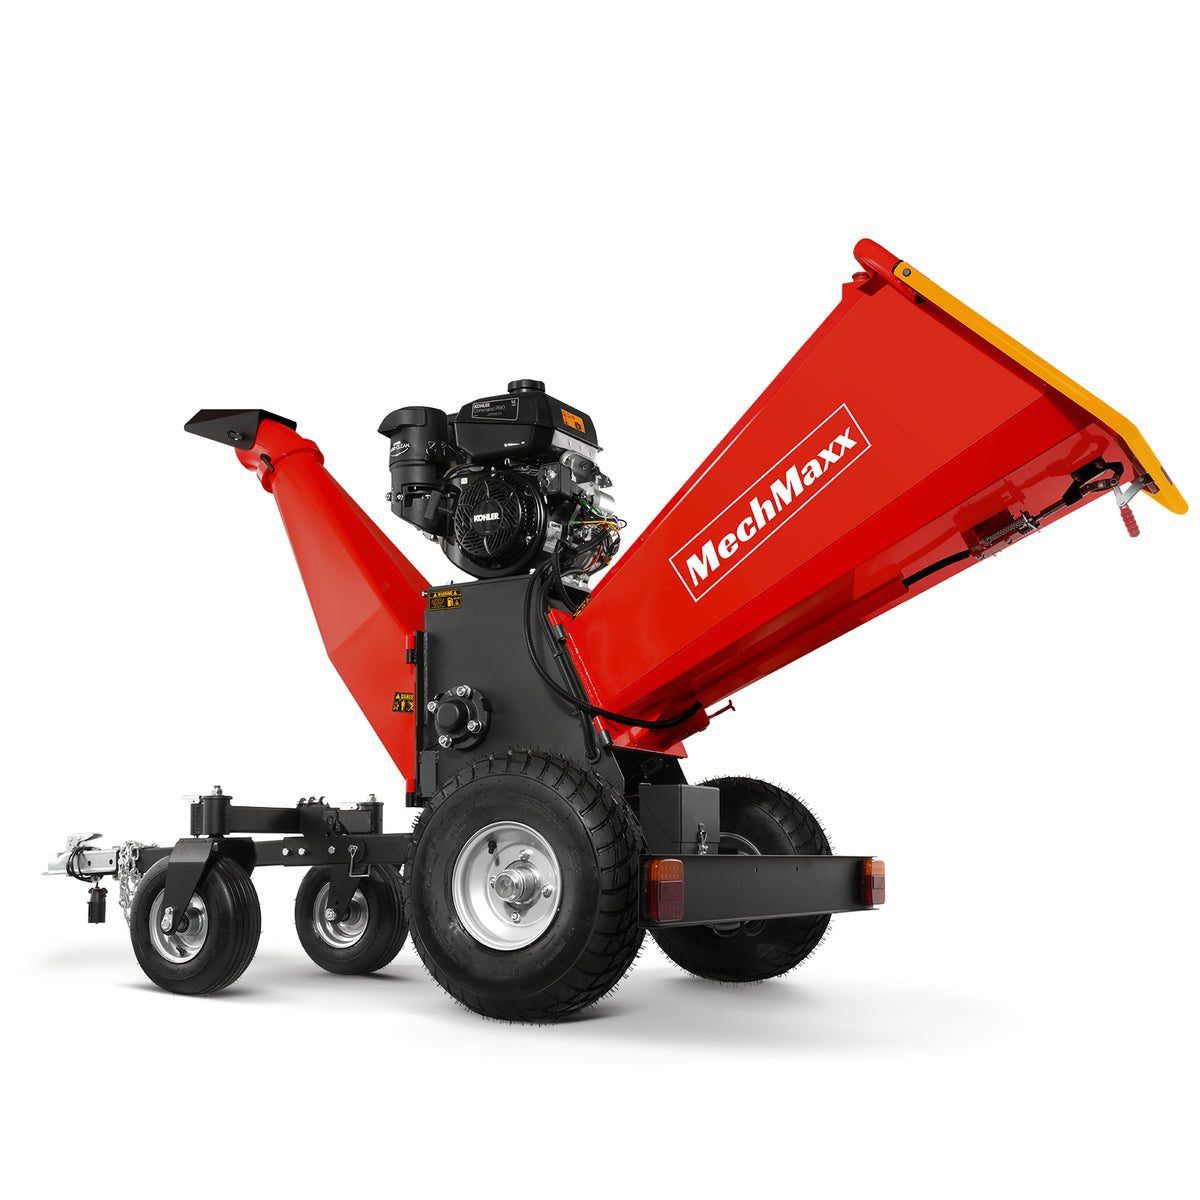 6 inch E-start KOHLER 429cc 14hp Gas Powered 4 - Wheel Drum Wood Chipper with Taillight , B150